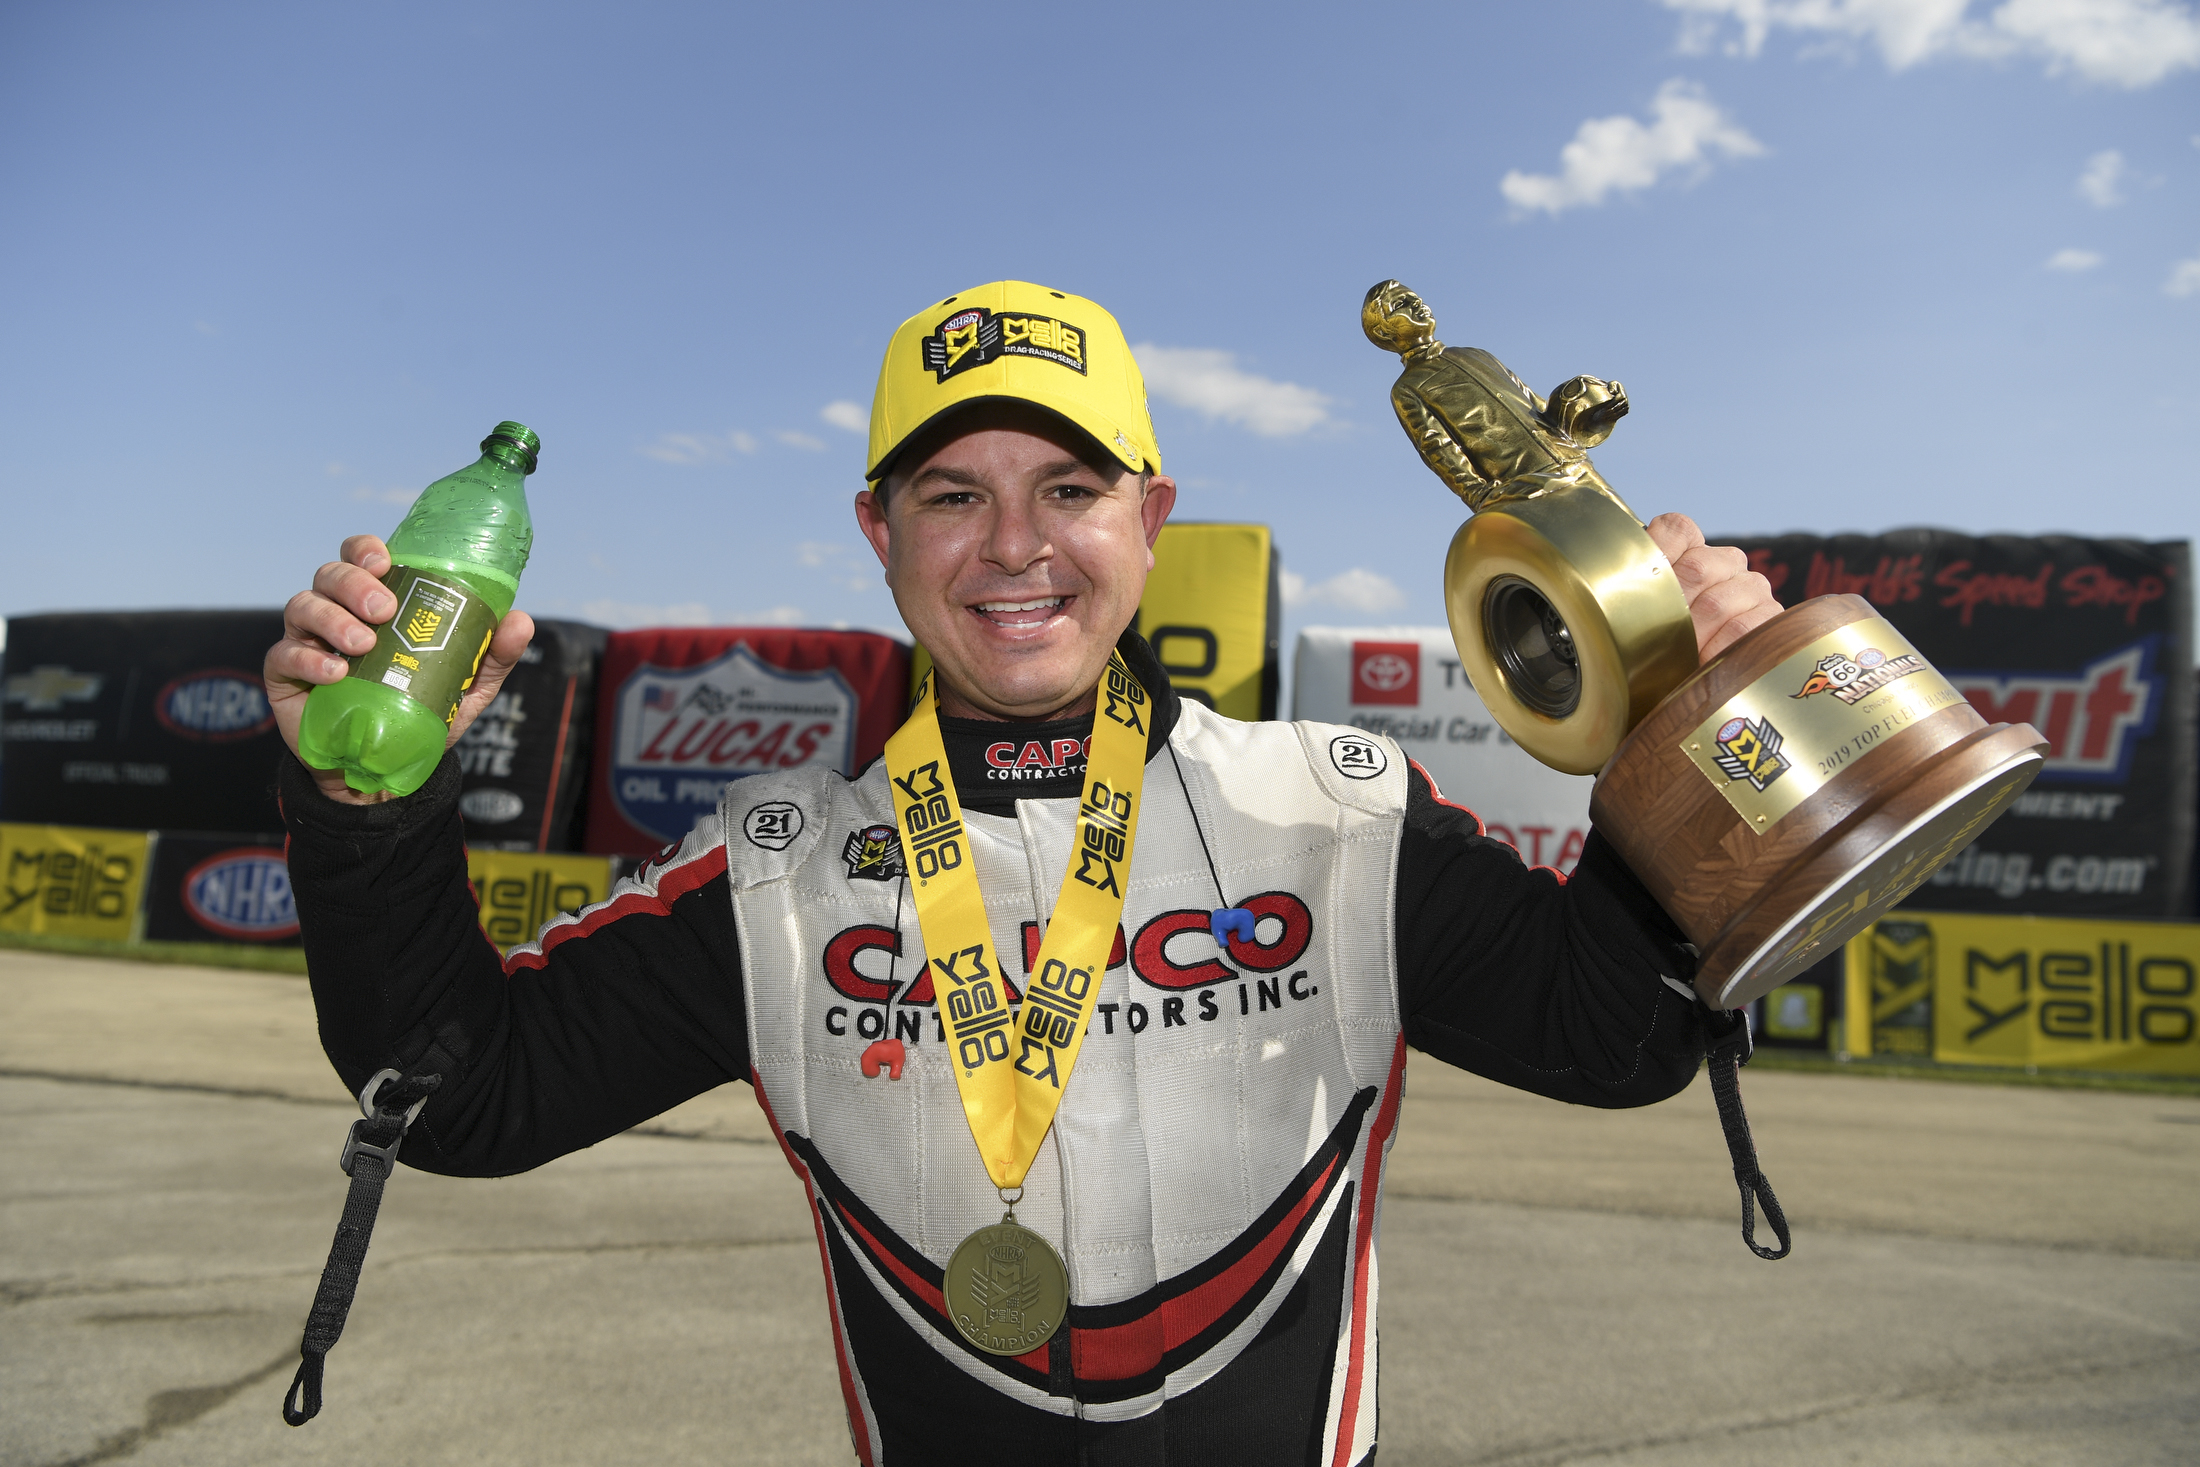 Top Fuel Dragster pilot Steve Torrence after winning the Wally at the Route 66 NHRA Nationals